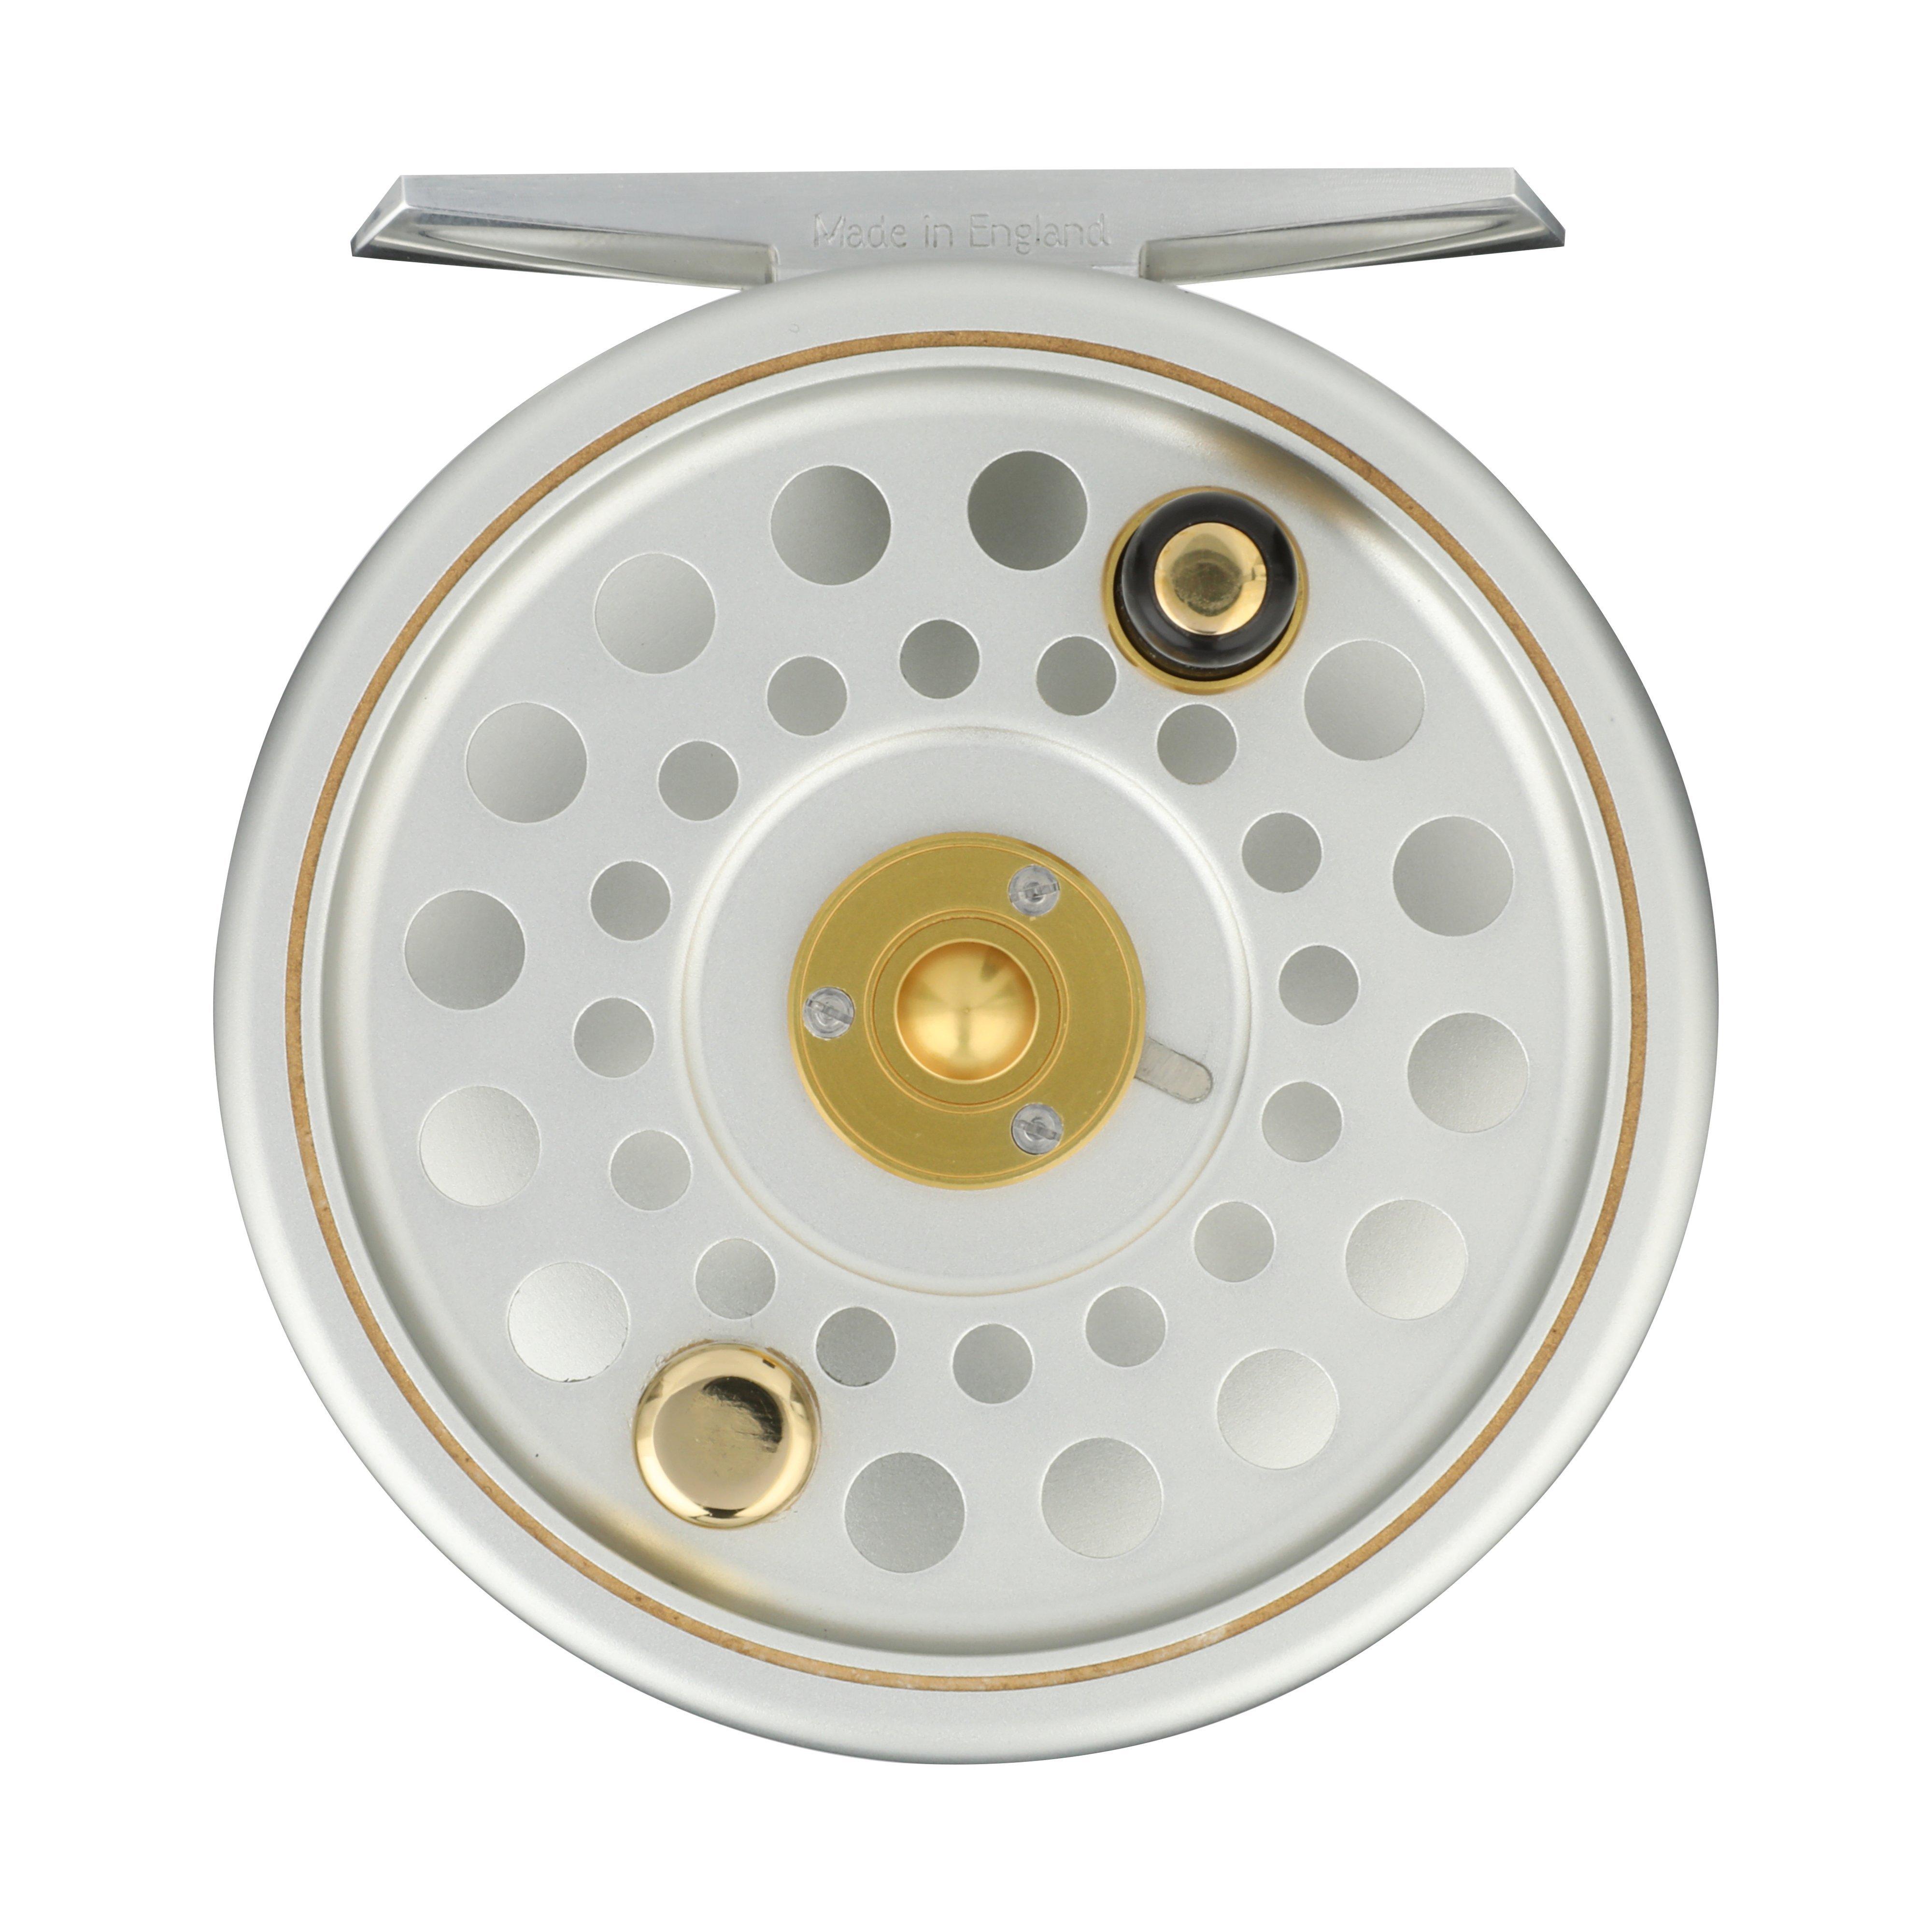 NEW HARDY SOVEREIGN 7/8 WEIGHT FLY REEL IN SPITFIRE - IN STOCK